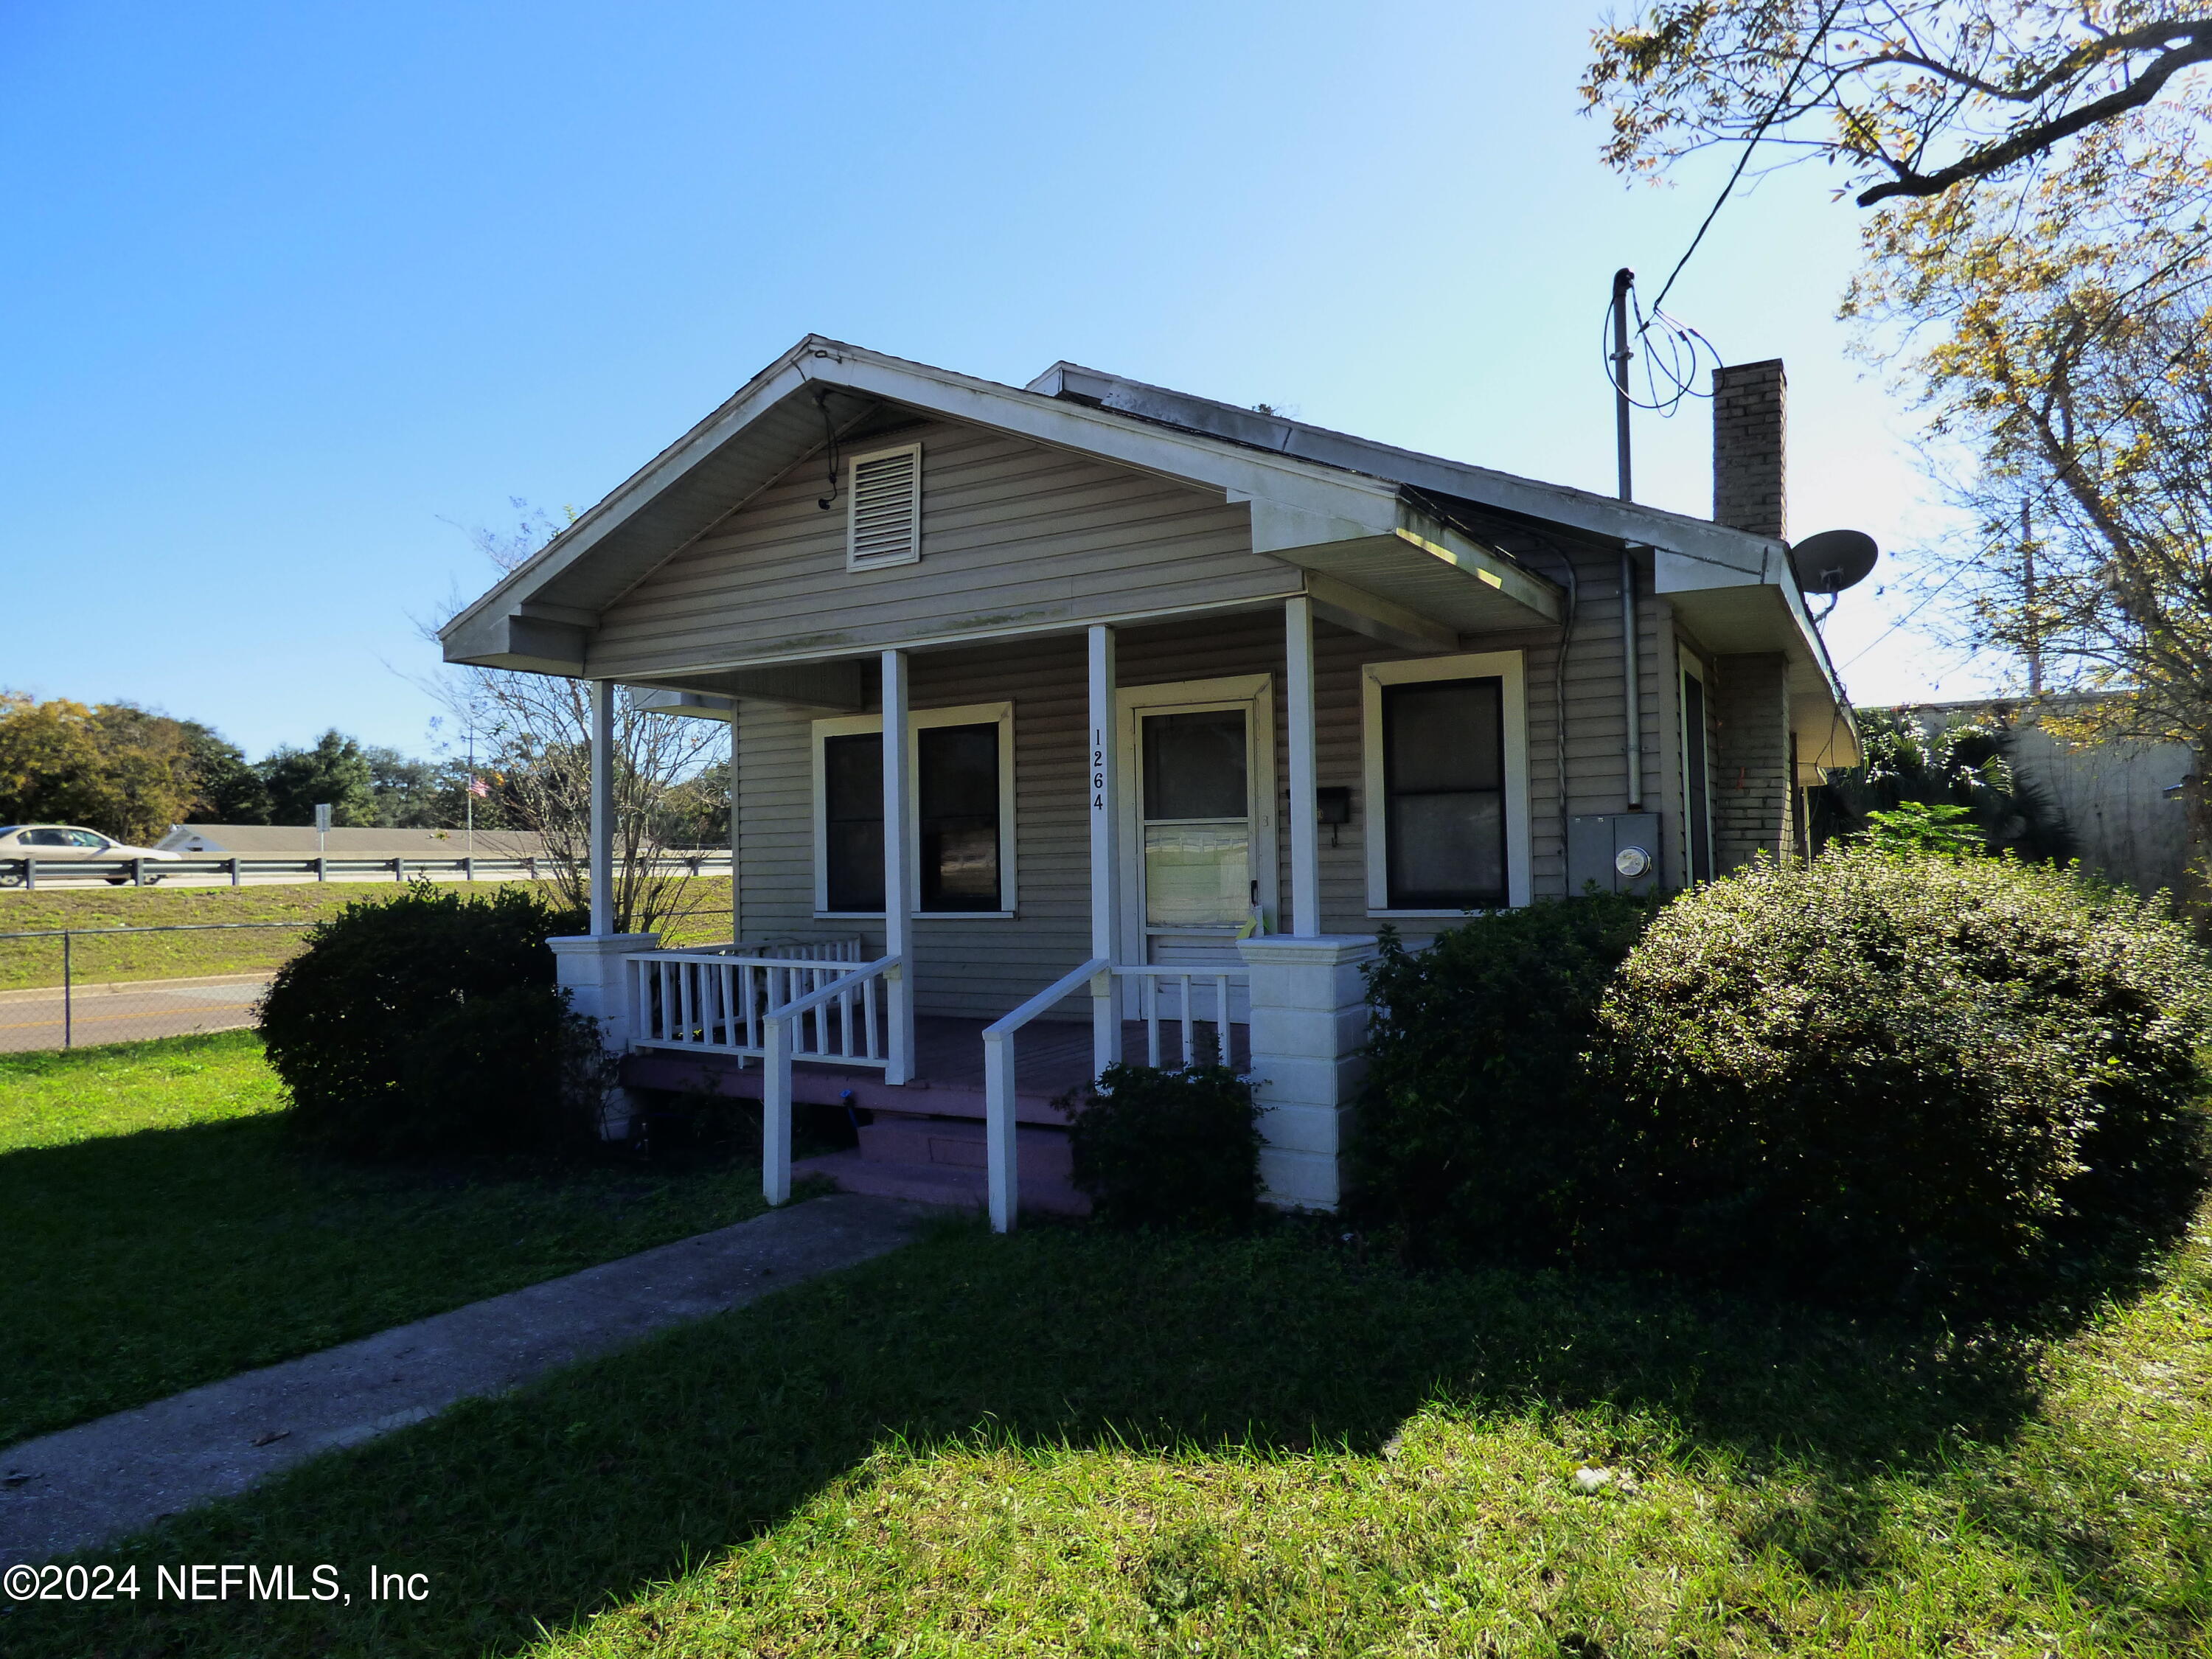 Jacksonville, FL home for sale located at 1264 E 13th Street, Jacksonville, FL 32206